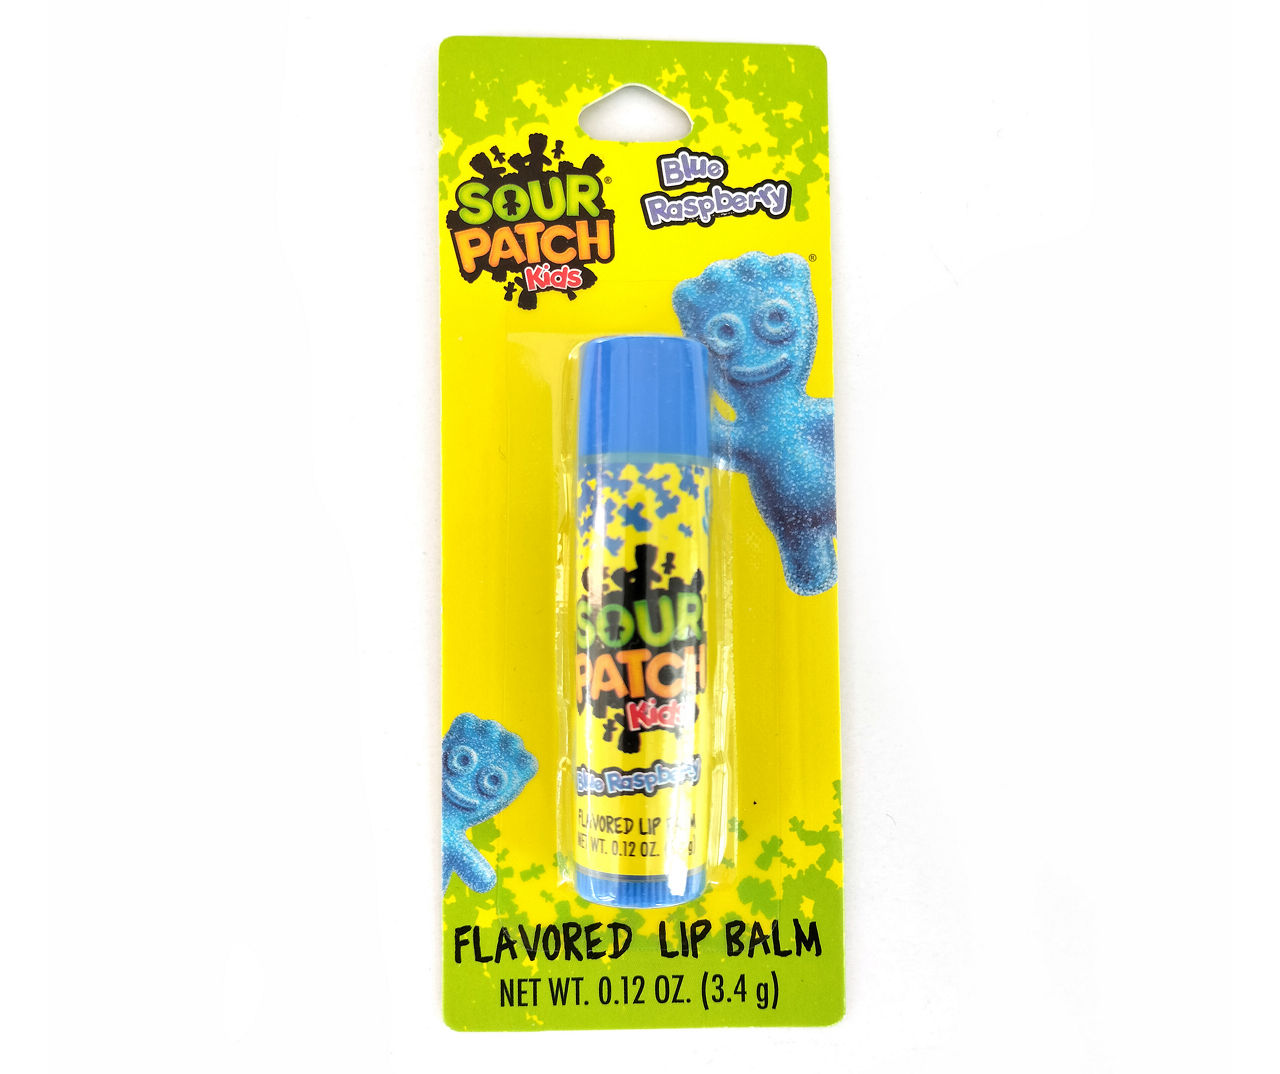 Sour Patch Kids Flavored Lip Balm, 8 Count